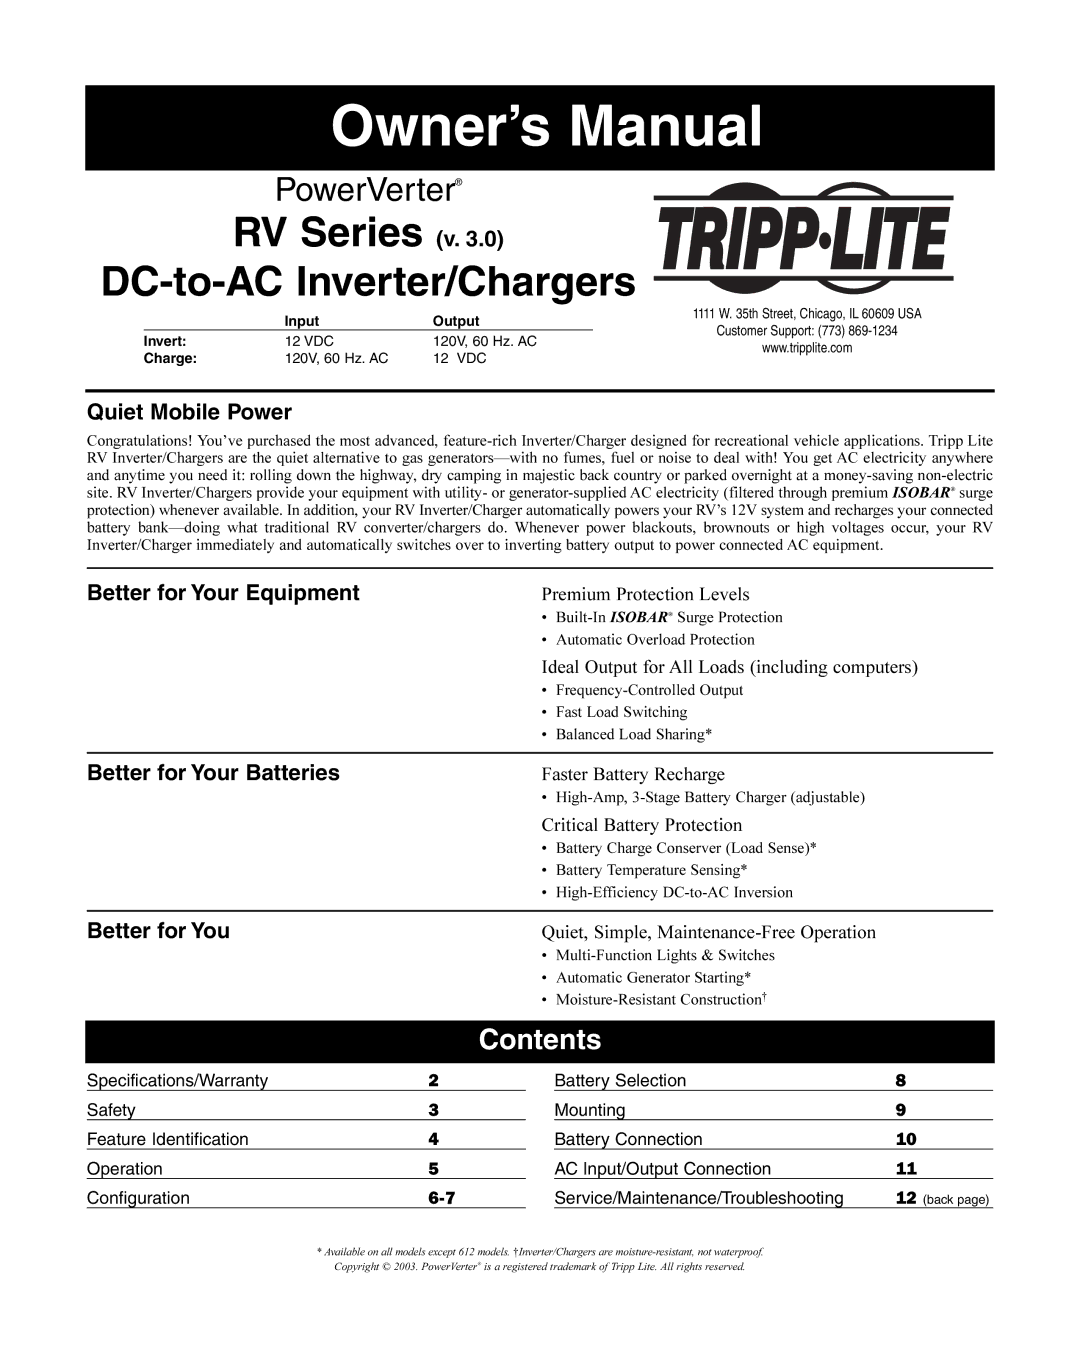 Tripp Lite 200310080, 93-2182 owner manual RV Series v DC-to-AC Inverter/Chargers, Contents 